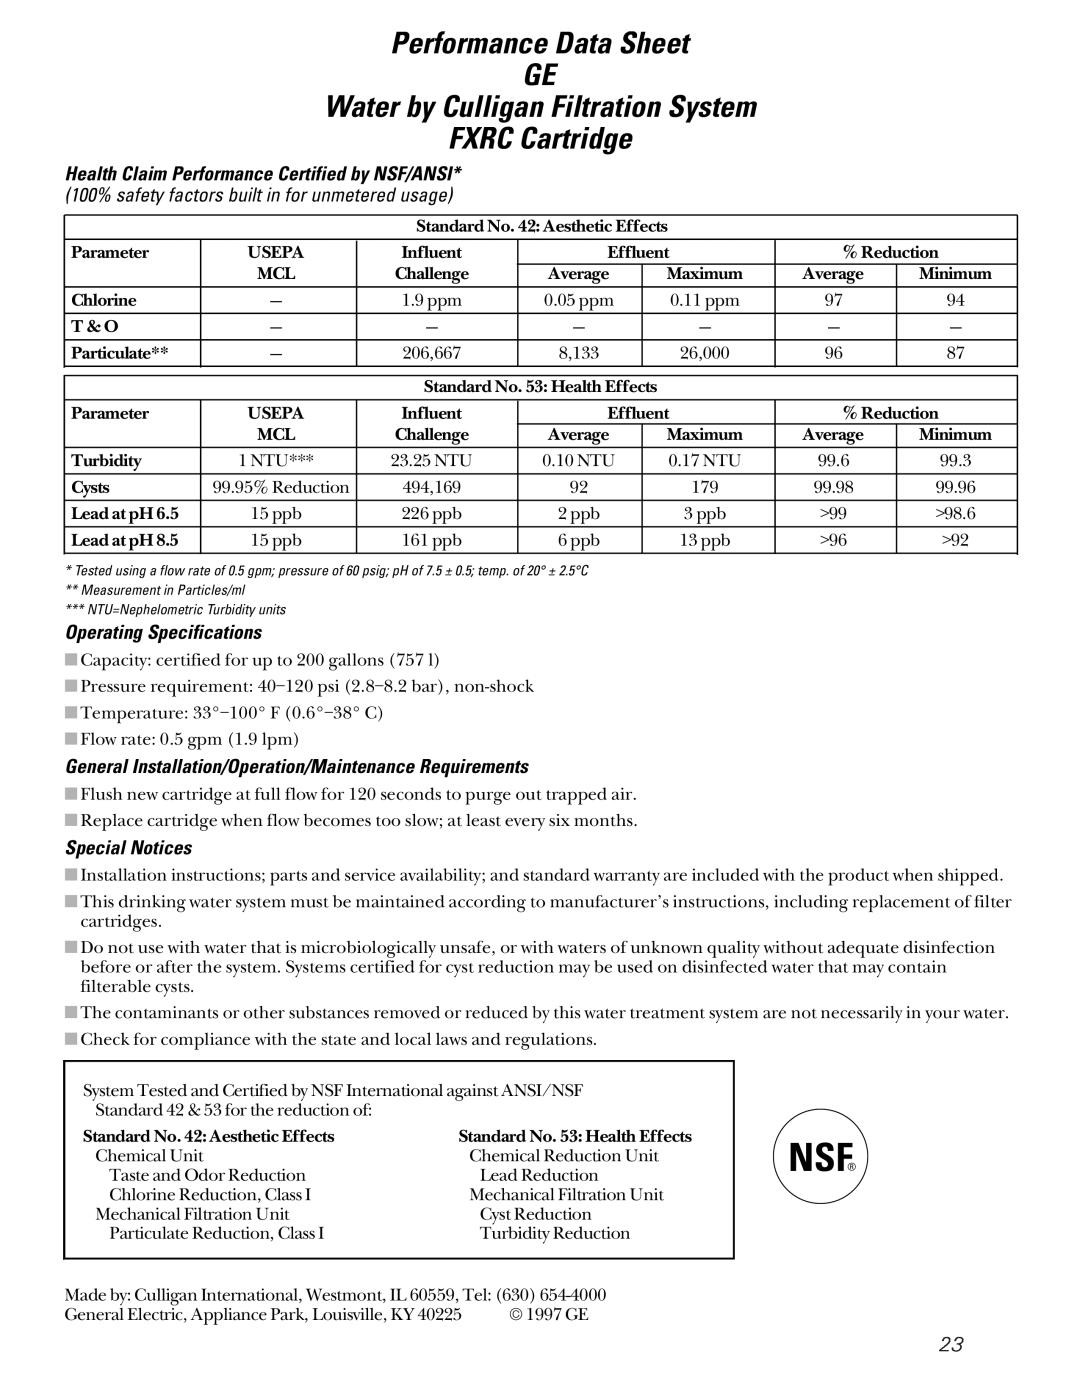 GE 162D7744P009 Performance Data Sheet GE, Water by Culligan Filtration System, FXRC Cartridge, Operating Specifications 